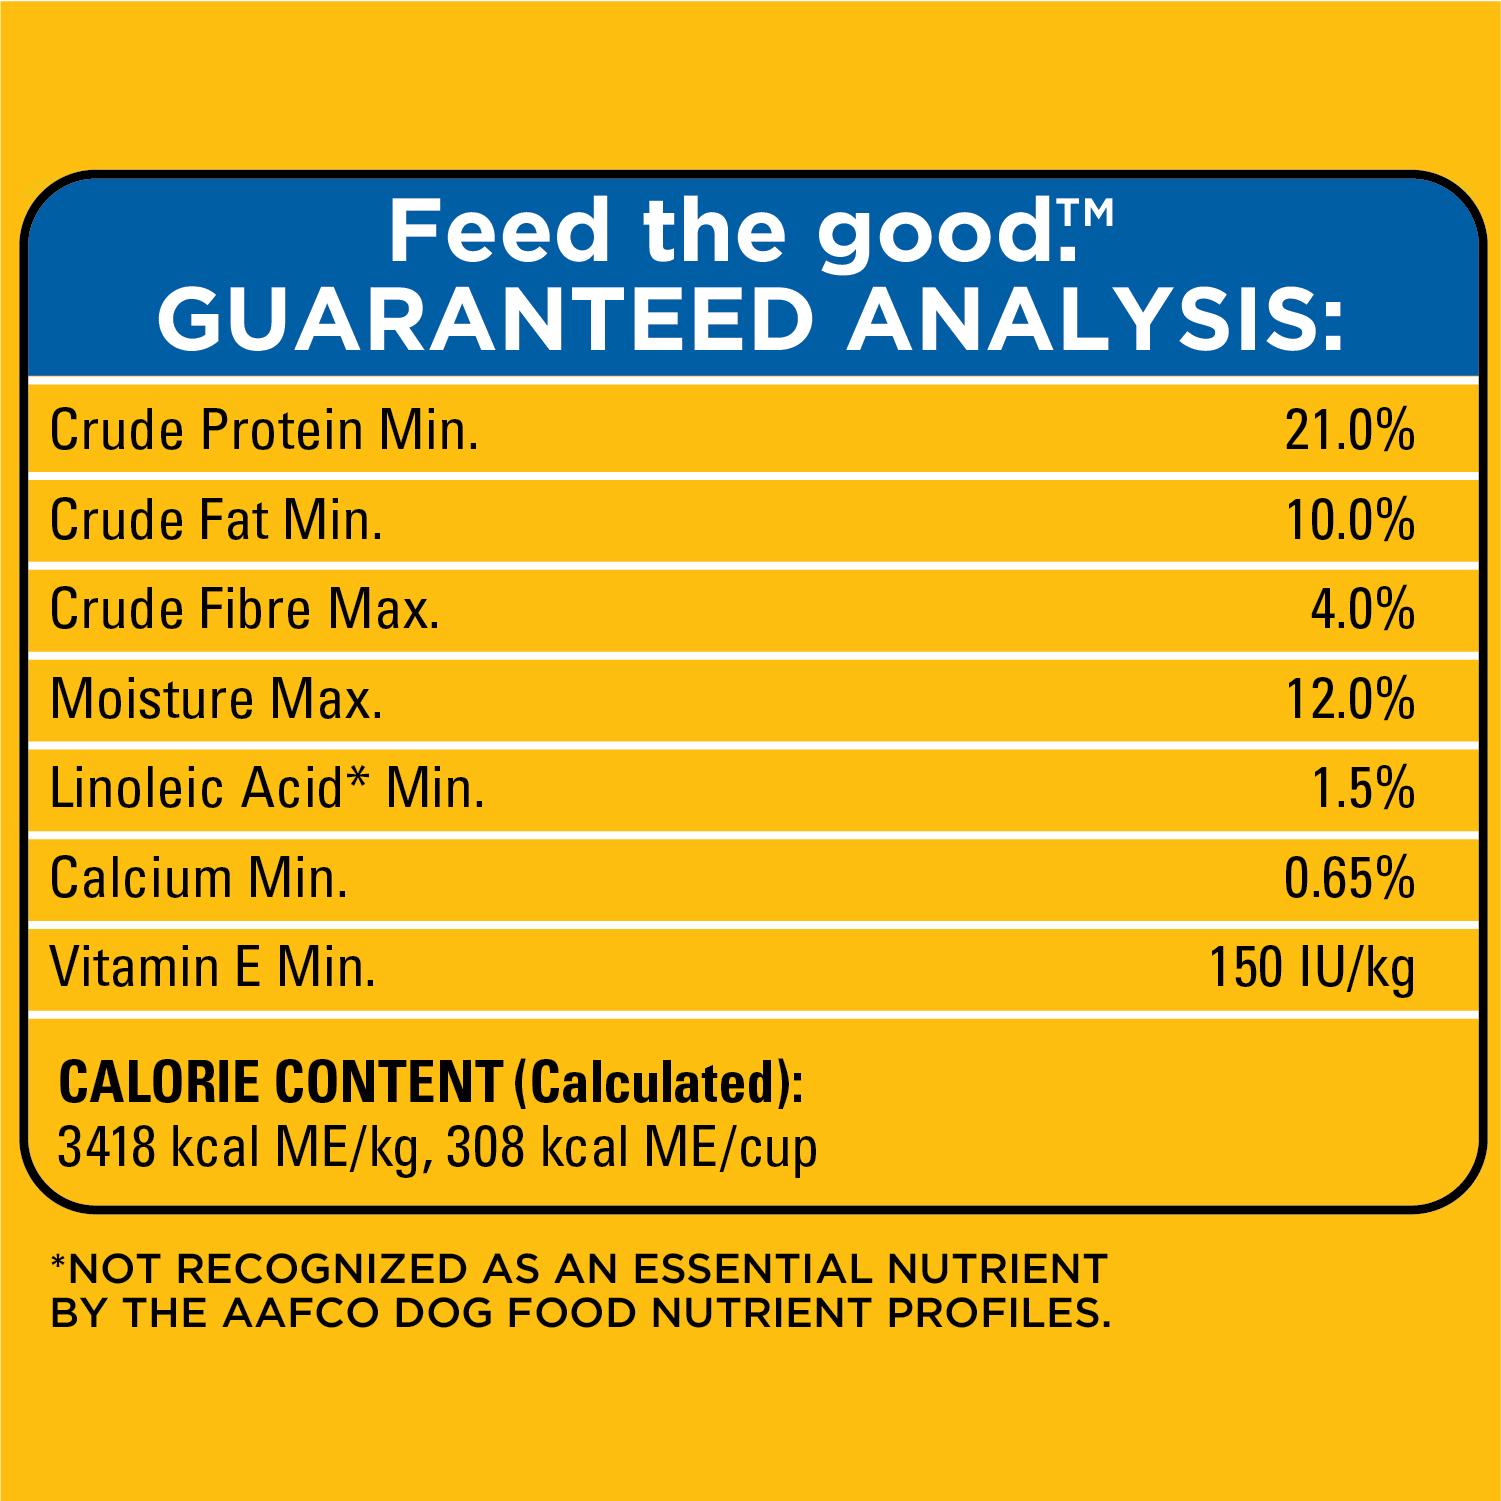 PEDIGREE® SMALL DOG+ GRILLED STEAK & VEGETABLE FLAVOUR DRY DOG FOOD guaranteed analysis image